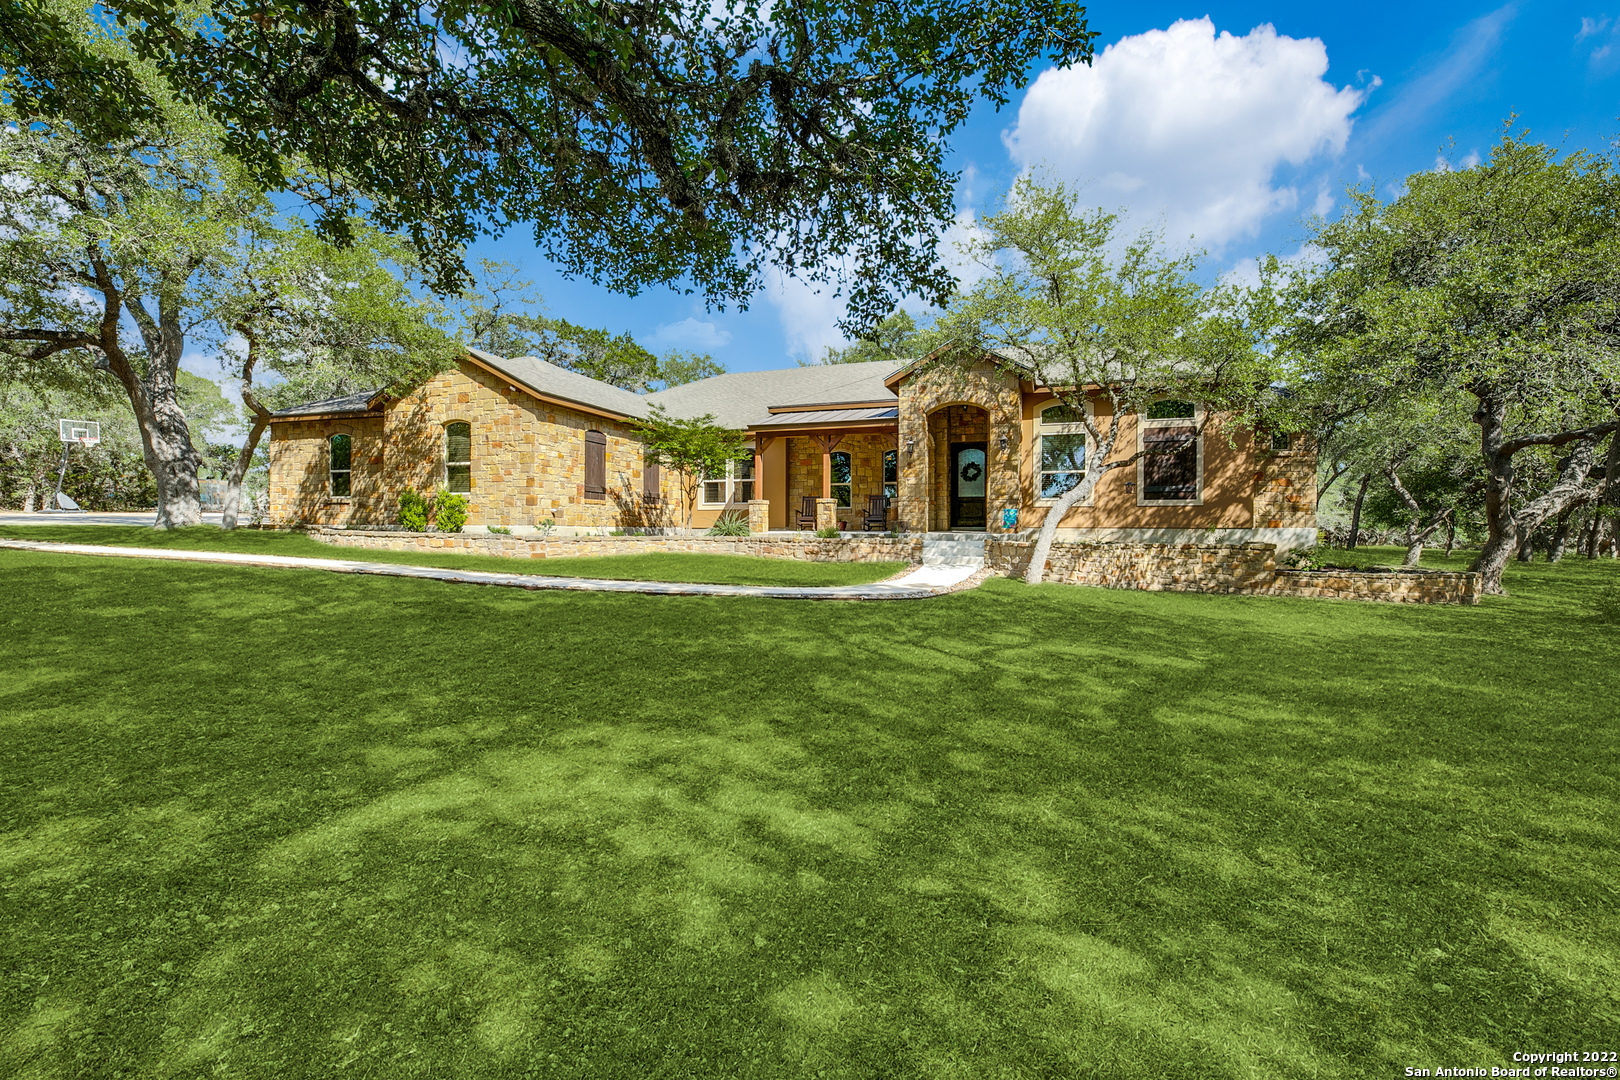 Welcome to 578 Prado Crossing located in the beautiful Spring Creek Estates. Located only five minutes outside Boerne, this home is in a highly sought-out location. A lengthy drive from the curb offers views of the shaded home on the approach. Warm colored stone and stucco make up the beautiful main exterior. A spacious front porch is framed by stone landscaping and wooden columns-the perfect place for enjoying your morning coffee. Inside, enjoy the space provided by an oversized layout, gleaming stained concrete floors, and natural light pouring in from all angles. A home office near the entry is perfect for those working from home. The open-concept dining room is fit for a large table set under a tiered tray ceiling and chandelier. A formal sitting room nearby offers picturesque views of the back yard through towering windows. The kitchen comes equipped with plenty of storage space behind custom oversized cabinetry, stainless-steel appliances, granite counters, glass cooktop island, and a Texas-sized walk-in pantry. The living room showcases both ideal views of the property outside and a massive corner fireplace made of stone to match the exterior. The primary suite is spacious and provides outdoor access and space for an additional sitting area if desired. The en suite features a dual vanity, soaking tub, and spa-like walk-in shower. Three additional bedrooms provide space for everyone or the versatility to include a home gym or additional study. All back yard access leads to an accommodating covered porch with steps leading to an extended patio-the ideal setting for your next outdoor gathering.